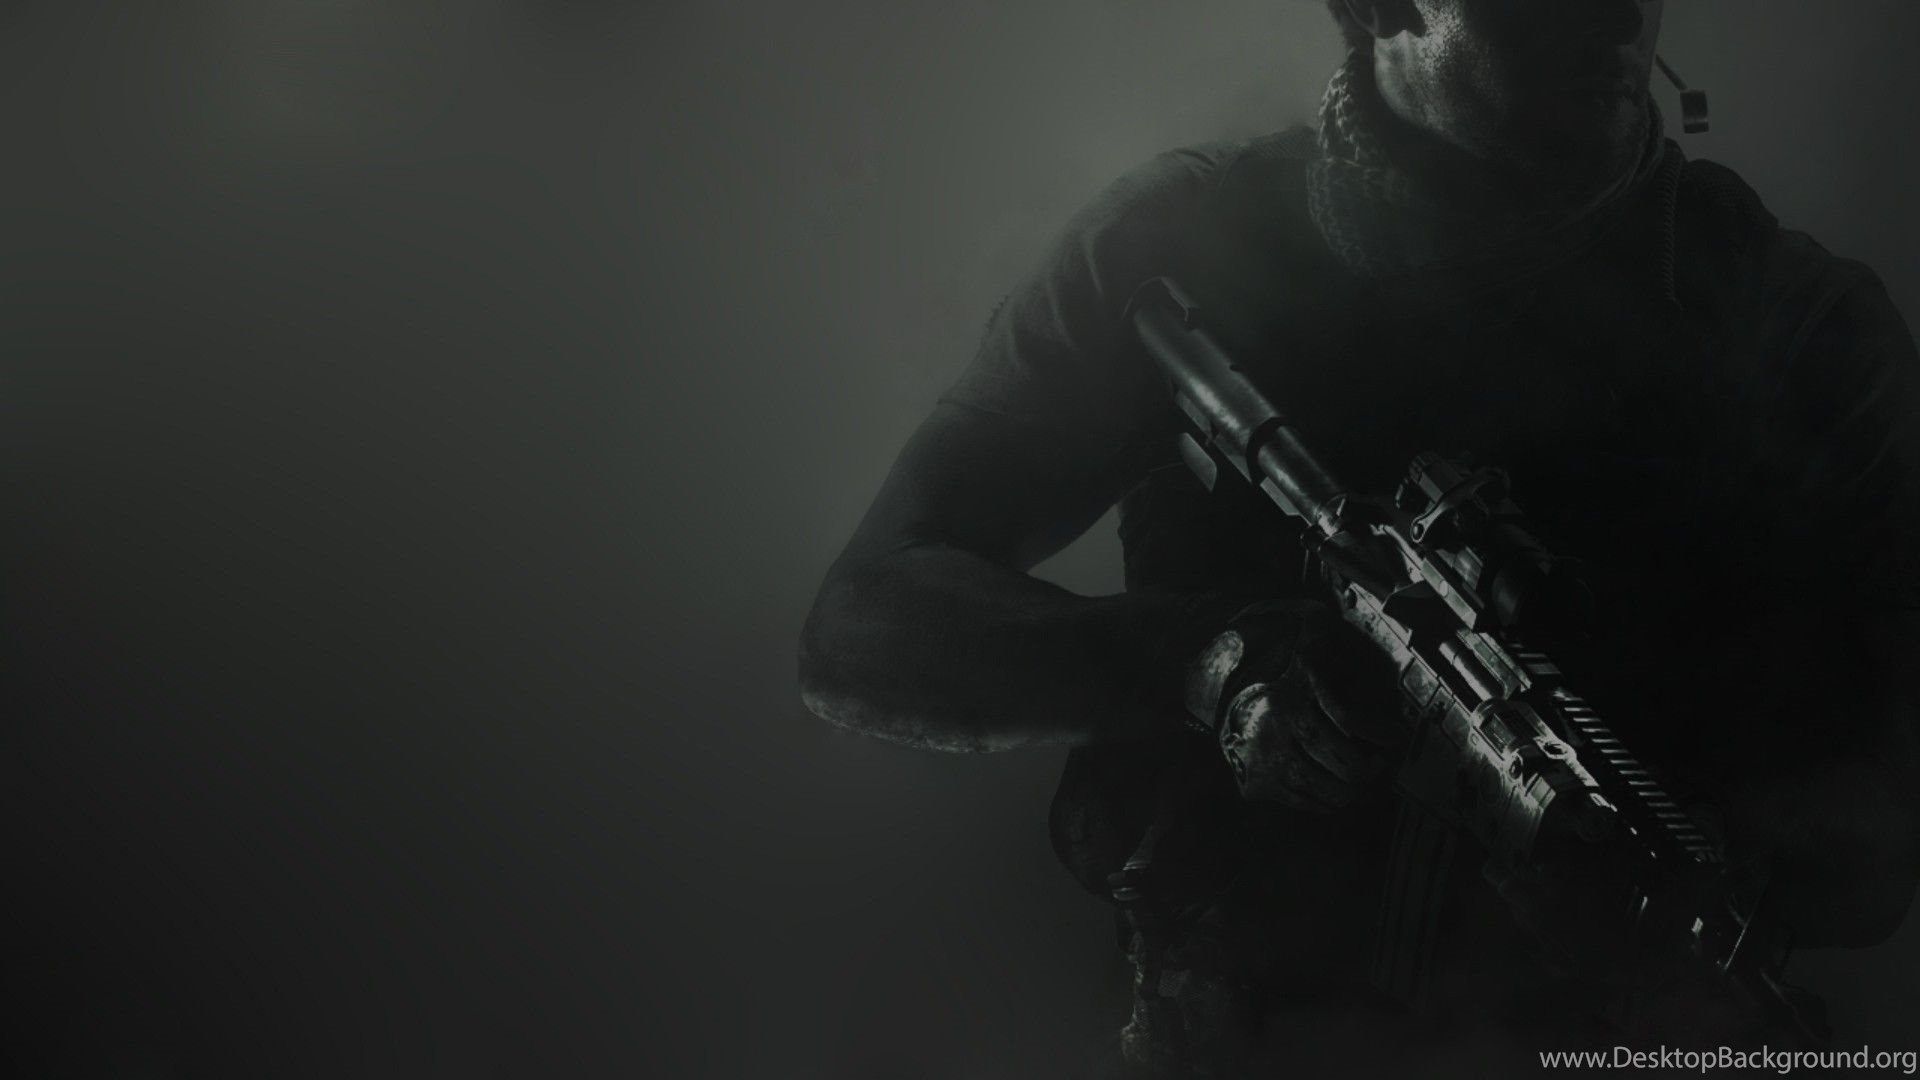 Special Forces In The Dark, The Game Call Of Duty Modern Warfare 3. Desktop Background